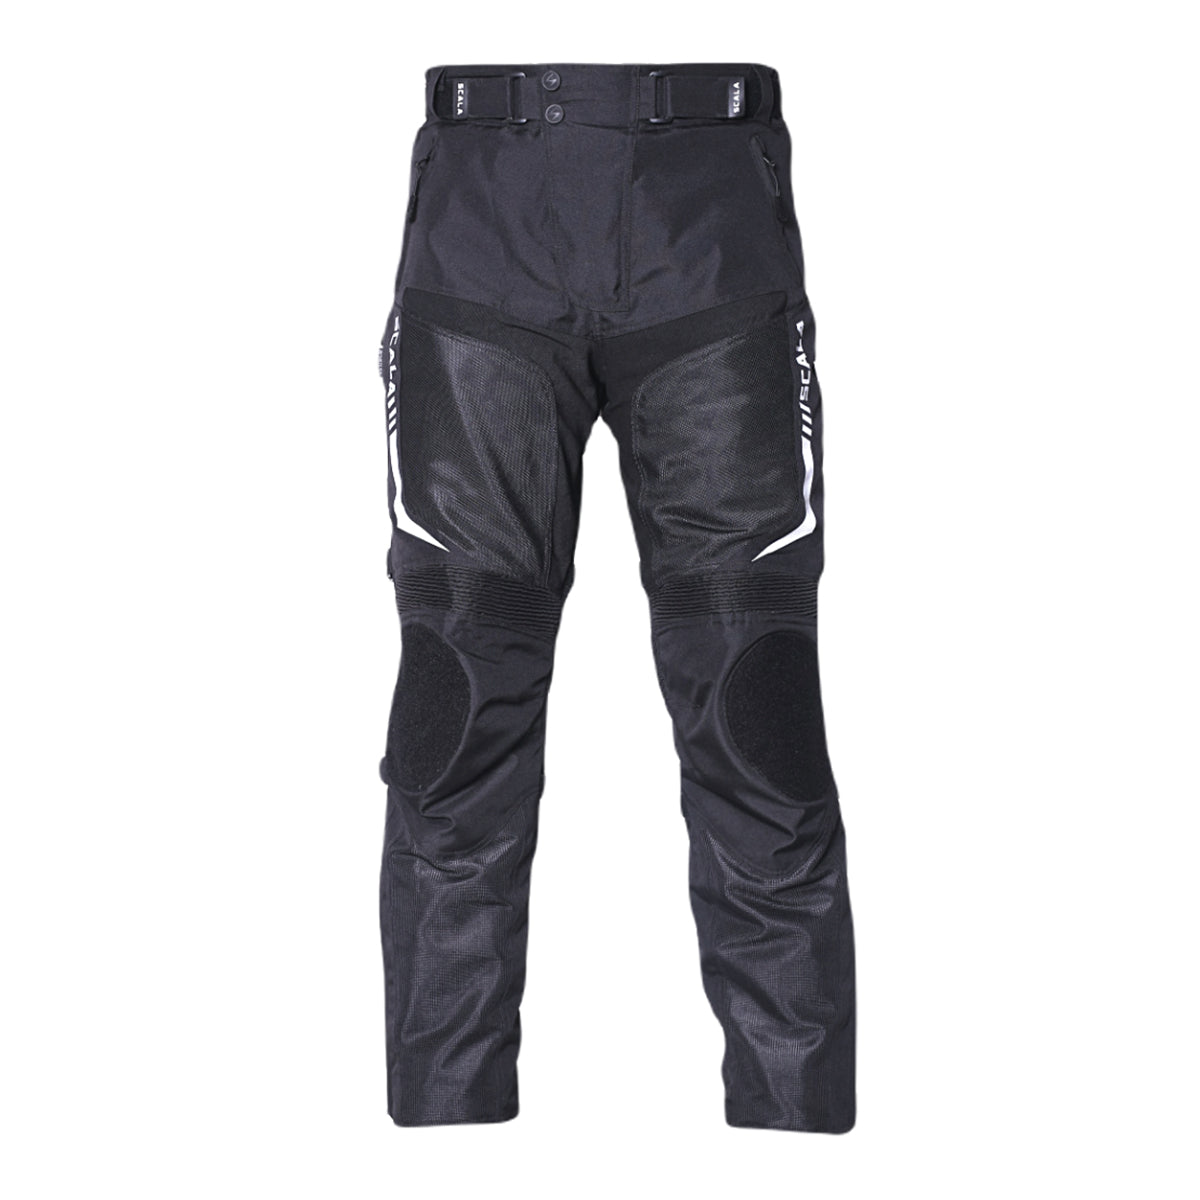 Raida Rover Motorcycle Riding Pant |Level 2 Protection | Cargo Pockets |  Rain & Thermal Liner Included (XS) Black : Amazon.in: Fashion